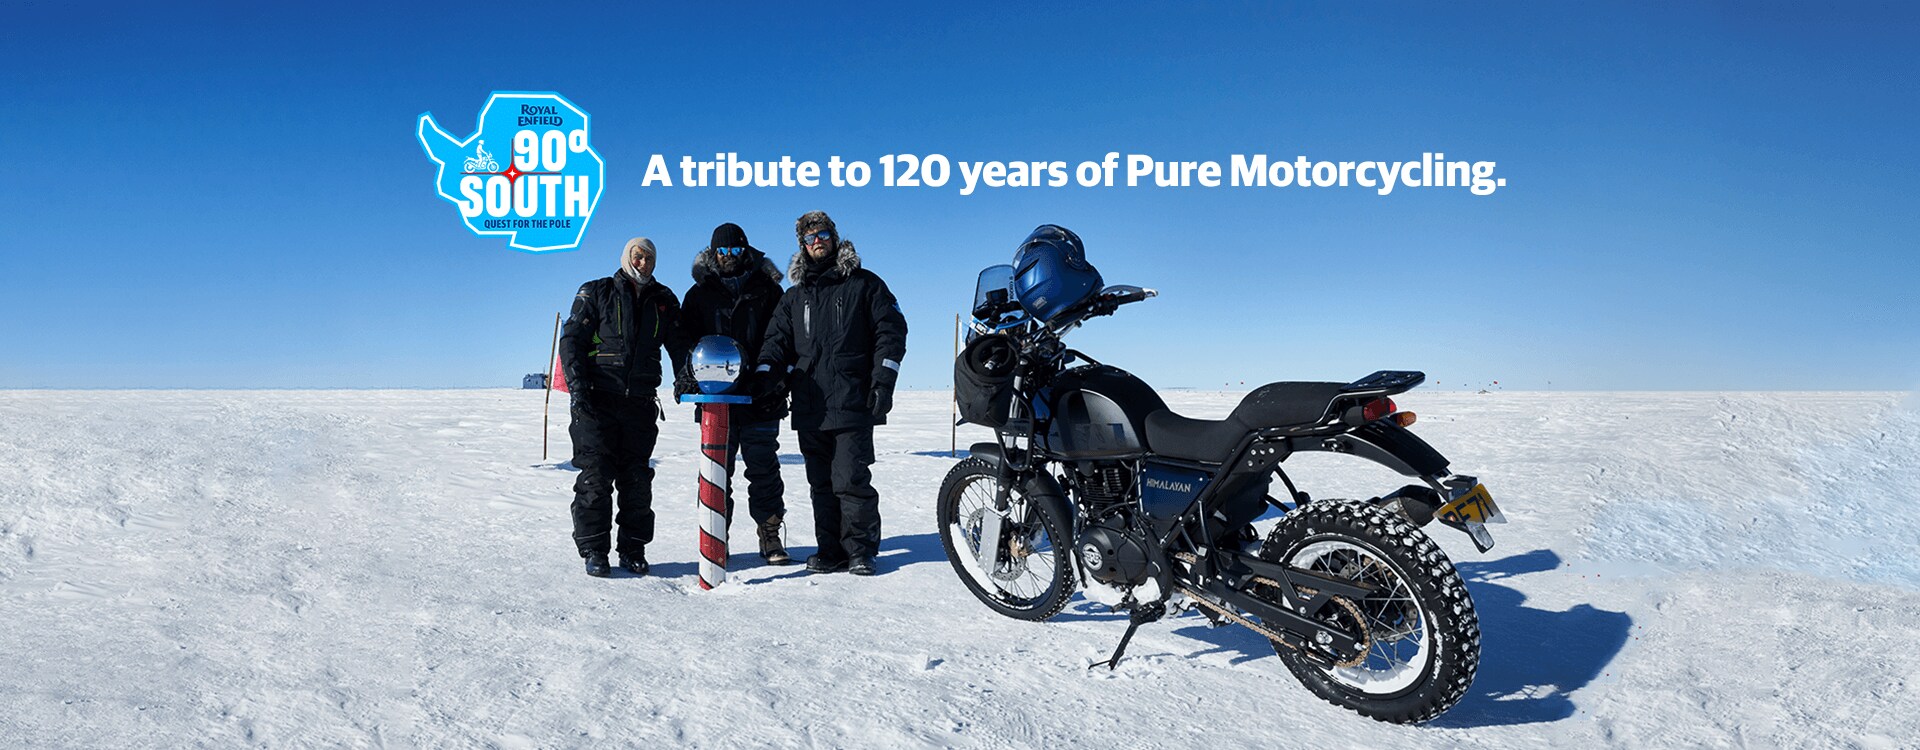 120years_of_pure_motorcycling